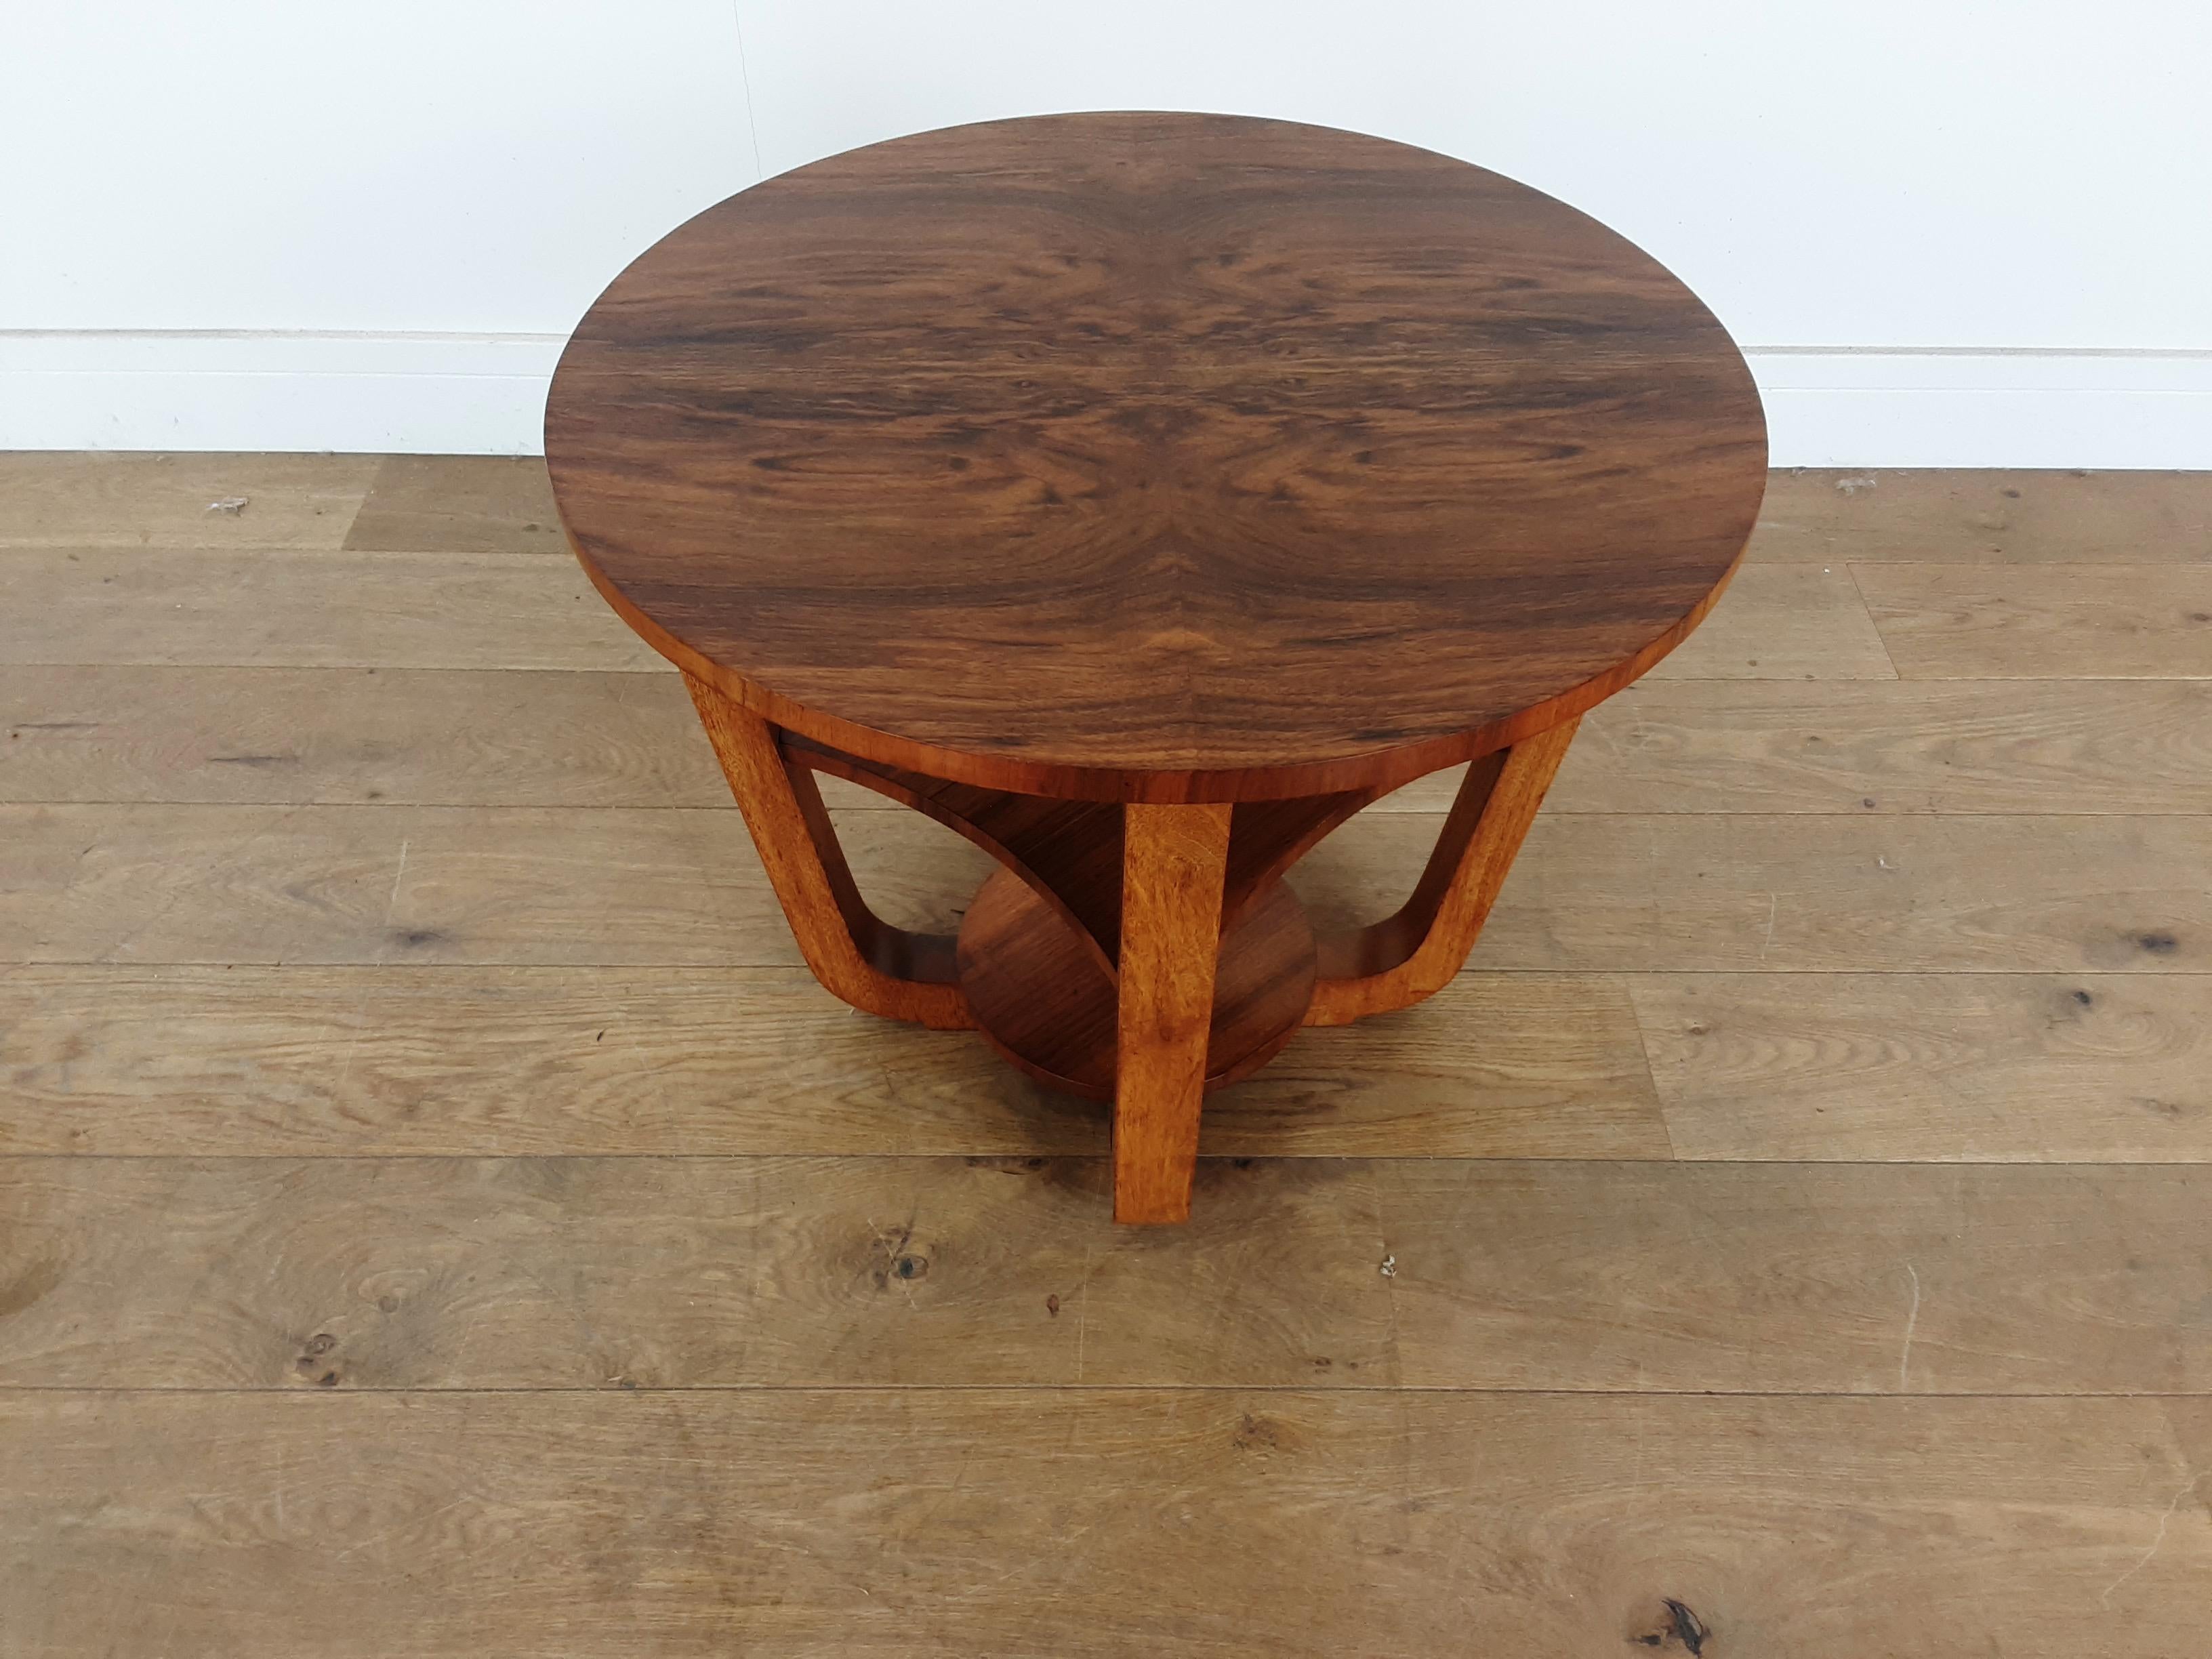 Art Deco table.
Art Deco 3-tier occasional table in a brown burr walnut.
Measures: 51 cm height, 60.5 cm diameter, 27 cm high to the centre shelf.
British, circa 1930.